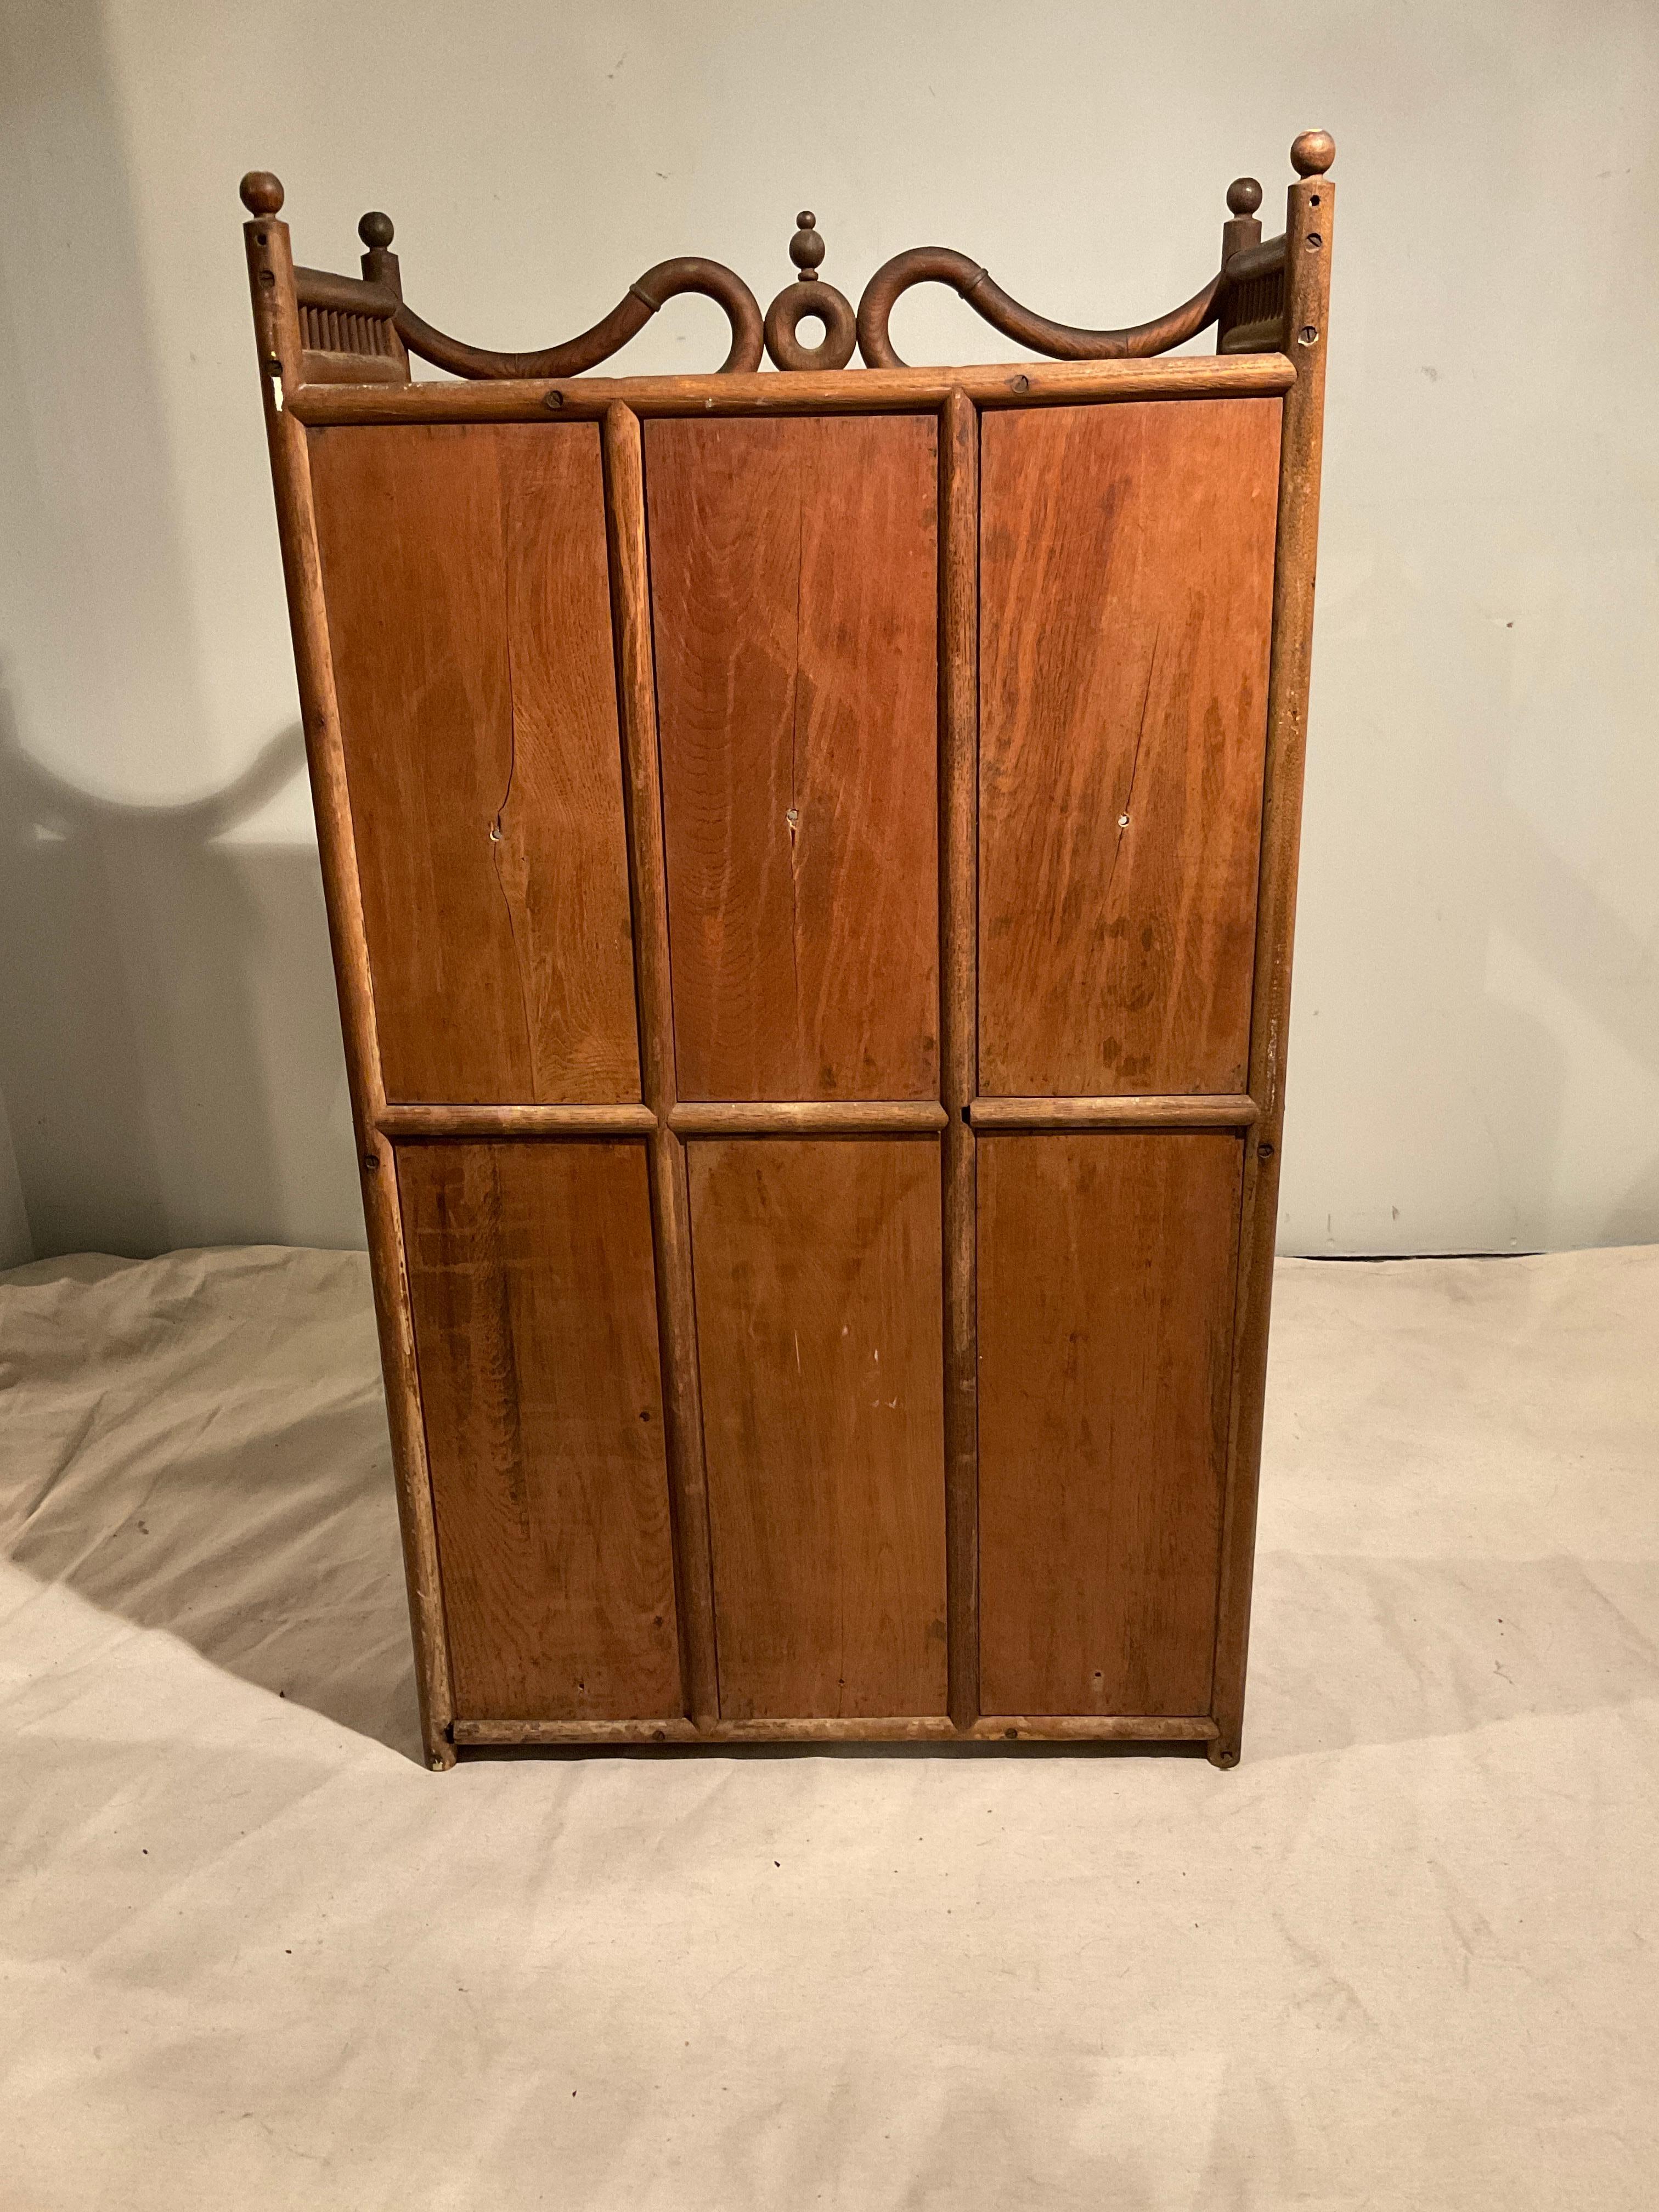 Early 20th Century 1900 Folk Art Display Cabinet For Sale